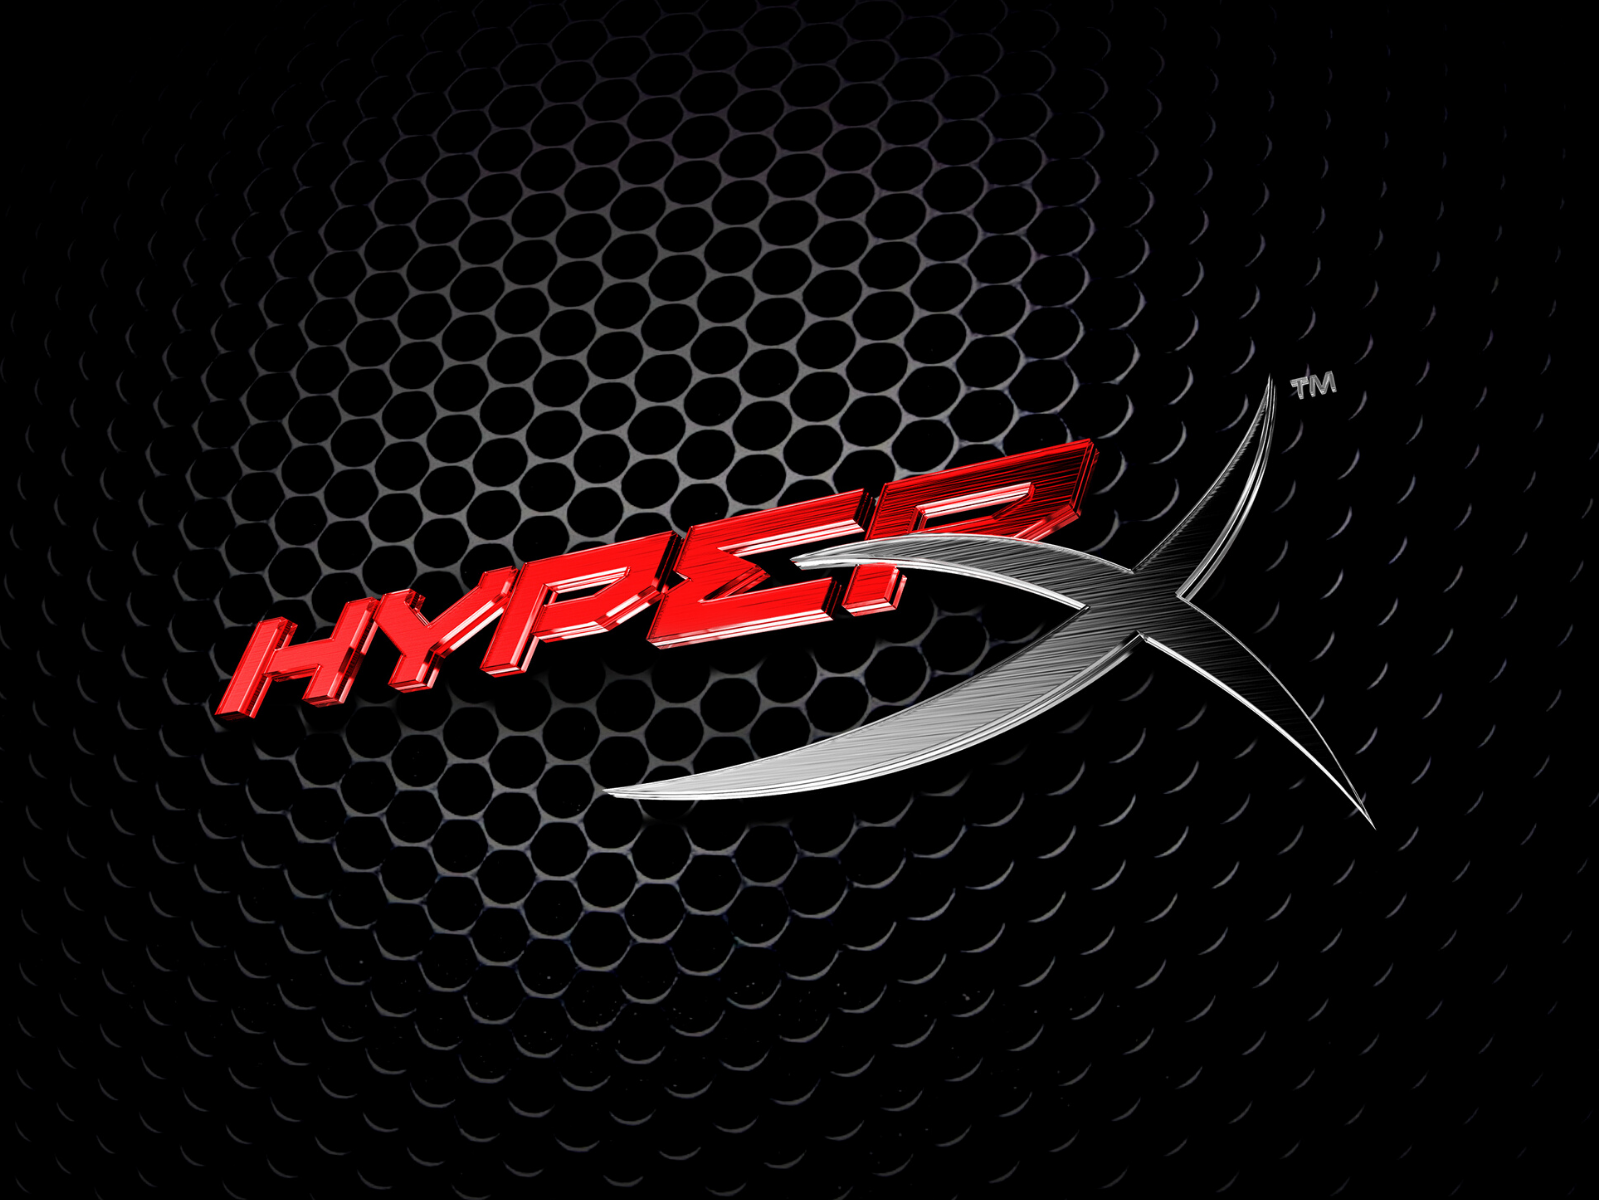 Latest HyperX products to lookout for in 2020